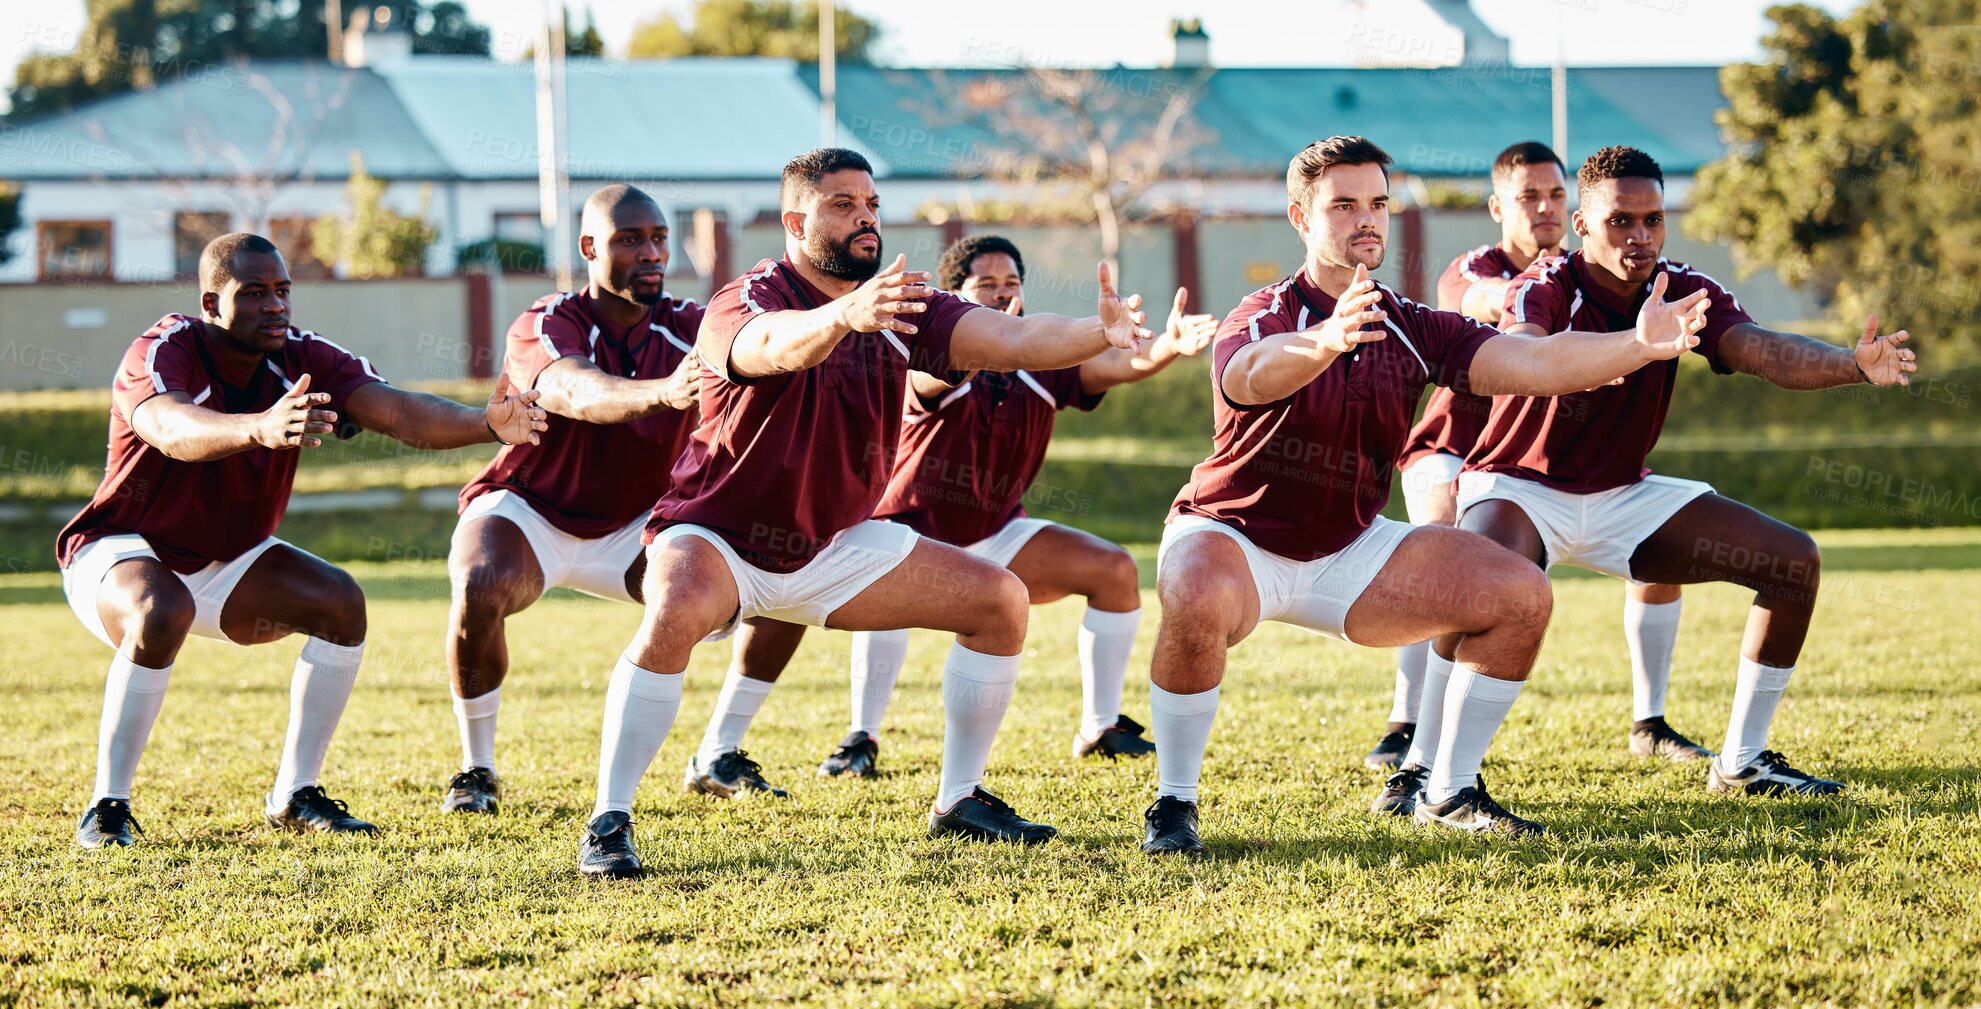 Buy stock photo Rugby, warm up or team stretching in training, exercise or practice with solidarity or unity together. Collaboration, fitness group or athletes exercising to start a game or match in sports stadium